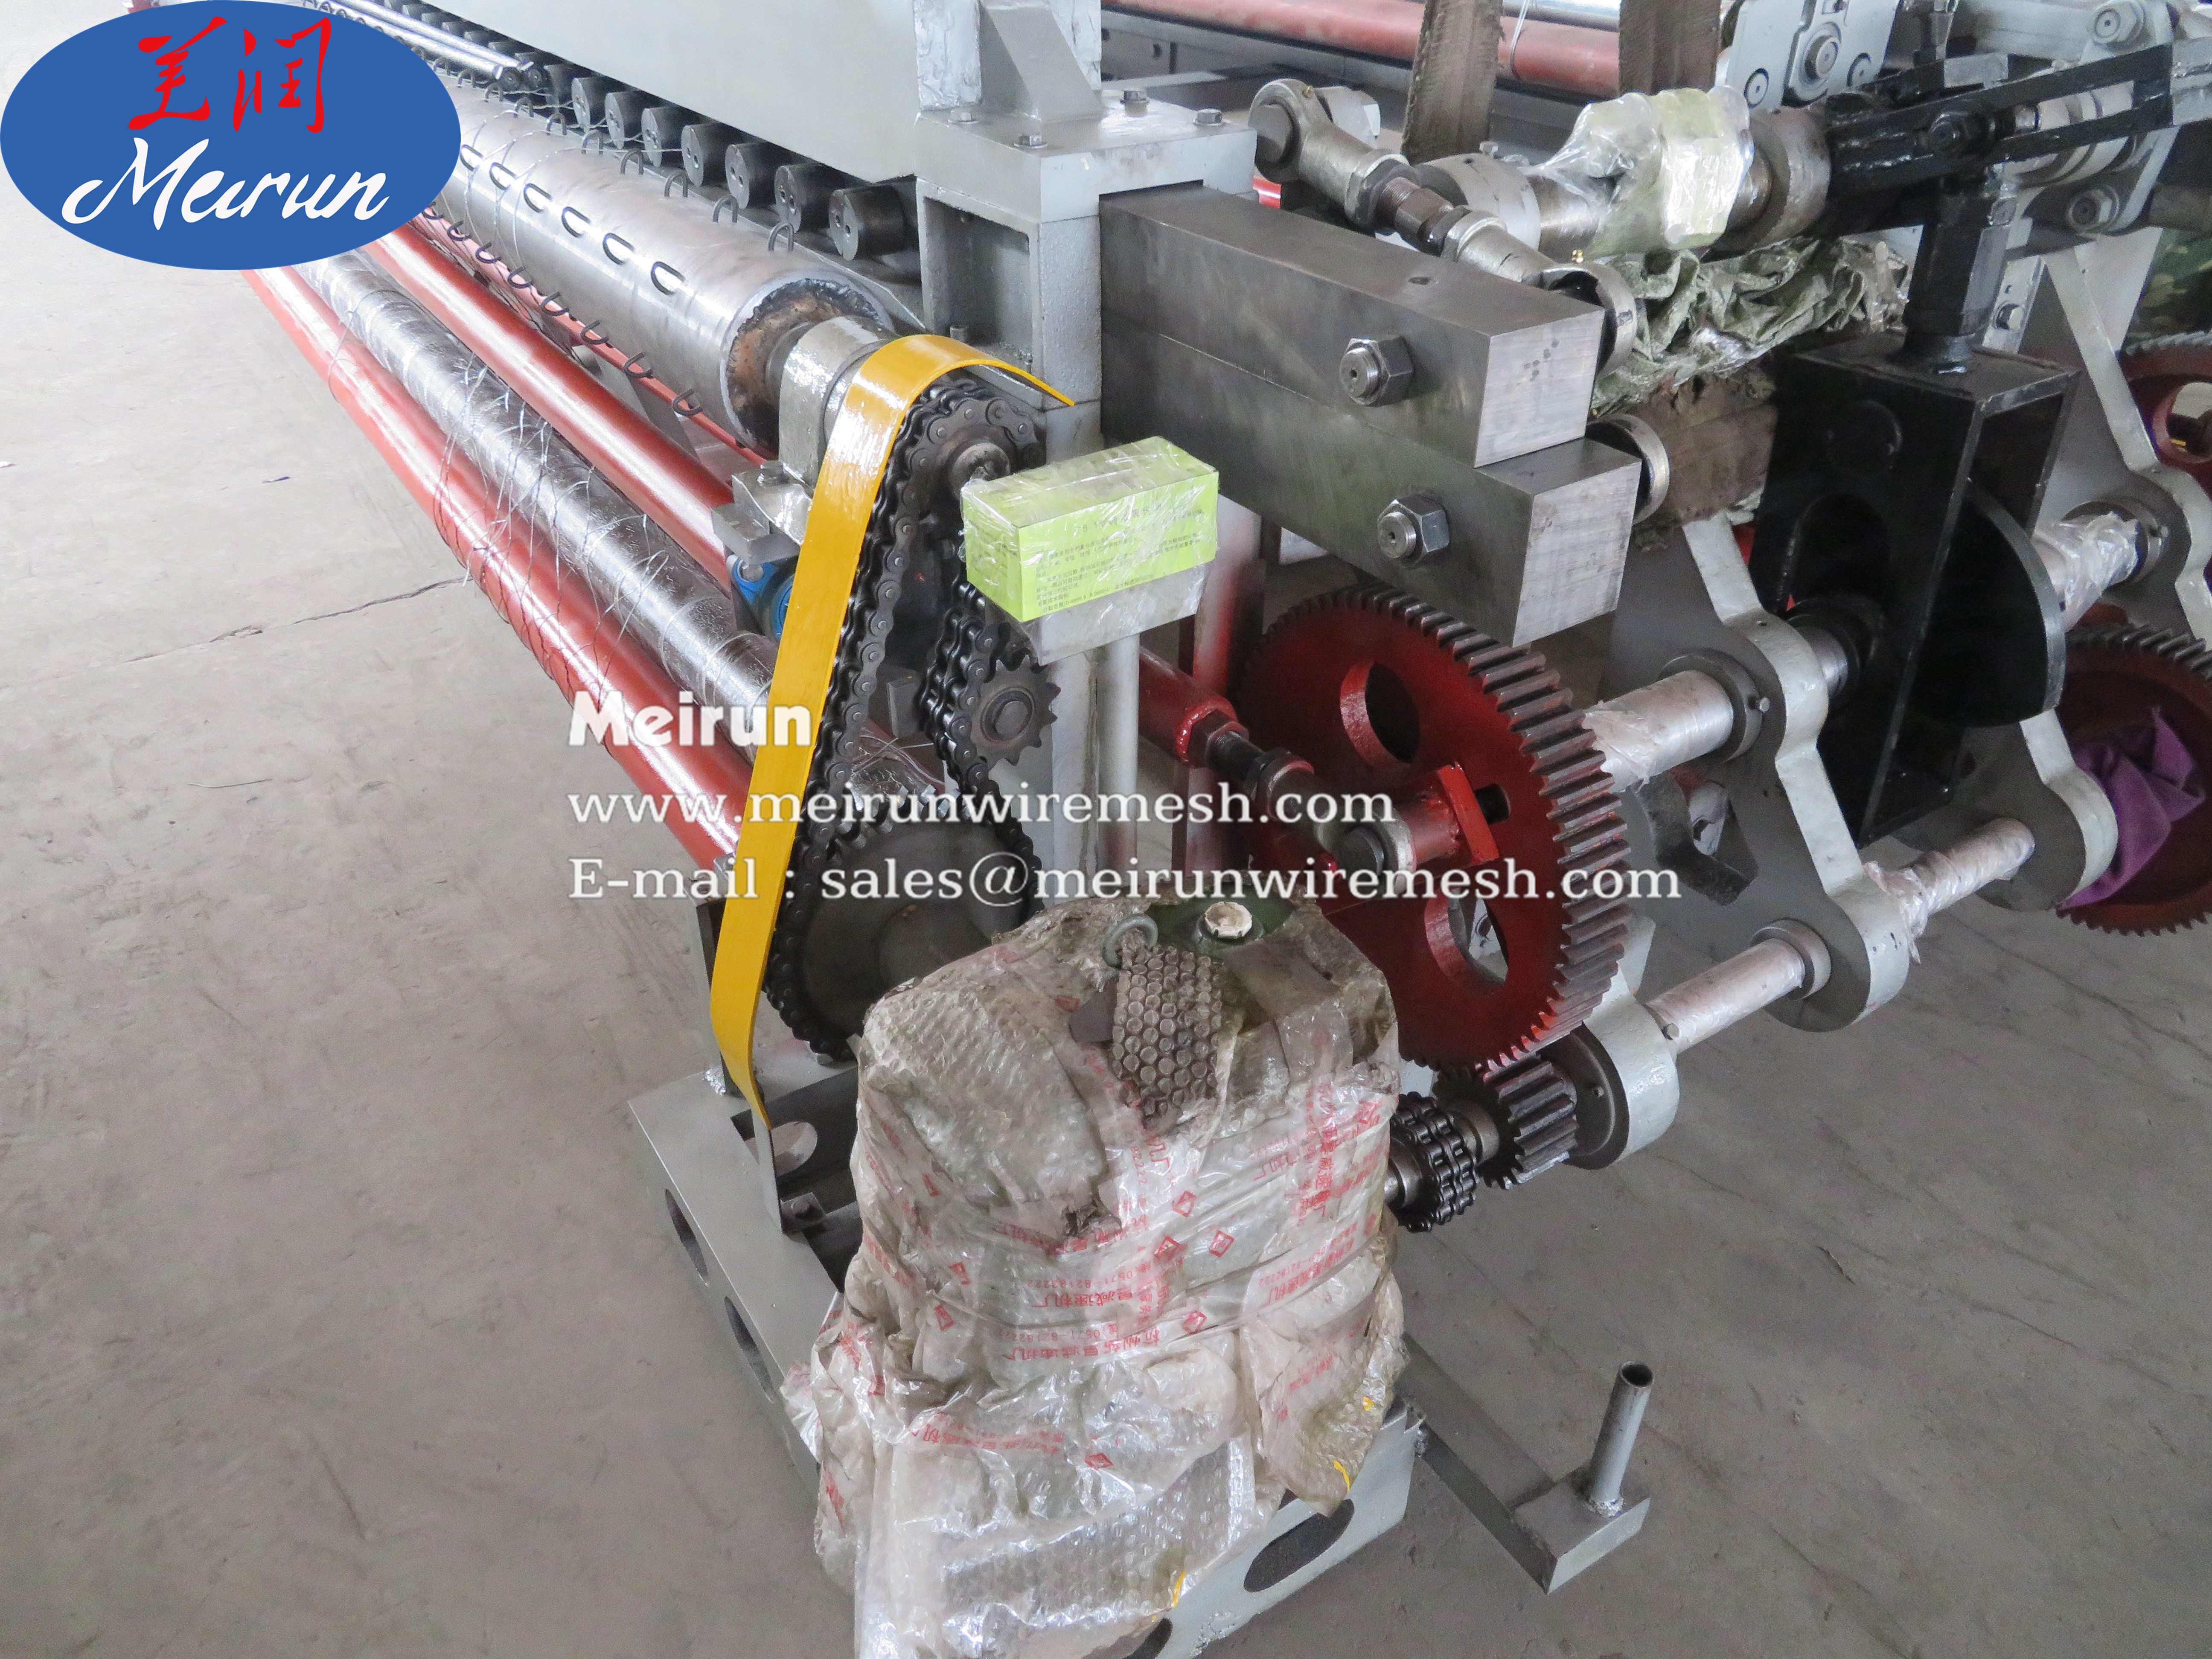 1200mm Plastic Extruded One Color Wire Mesh Making Machin E